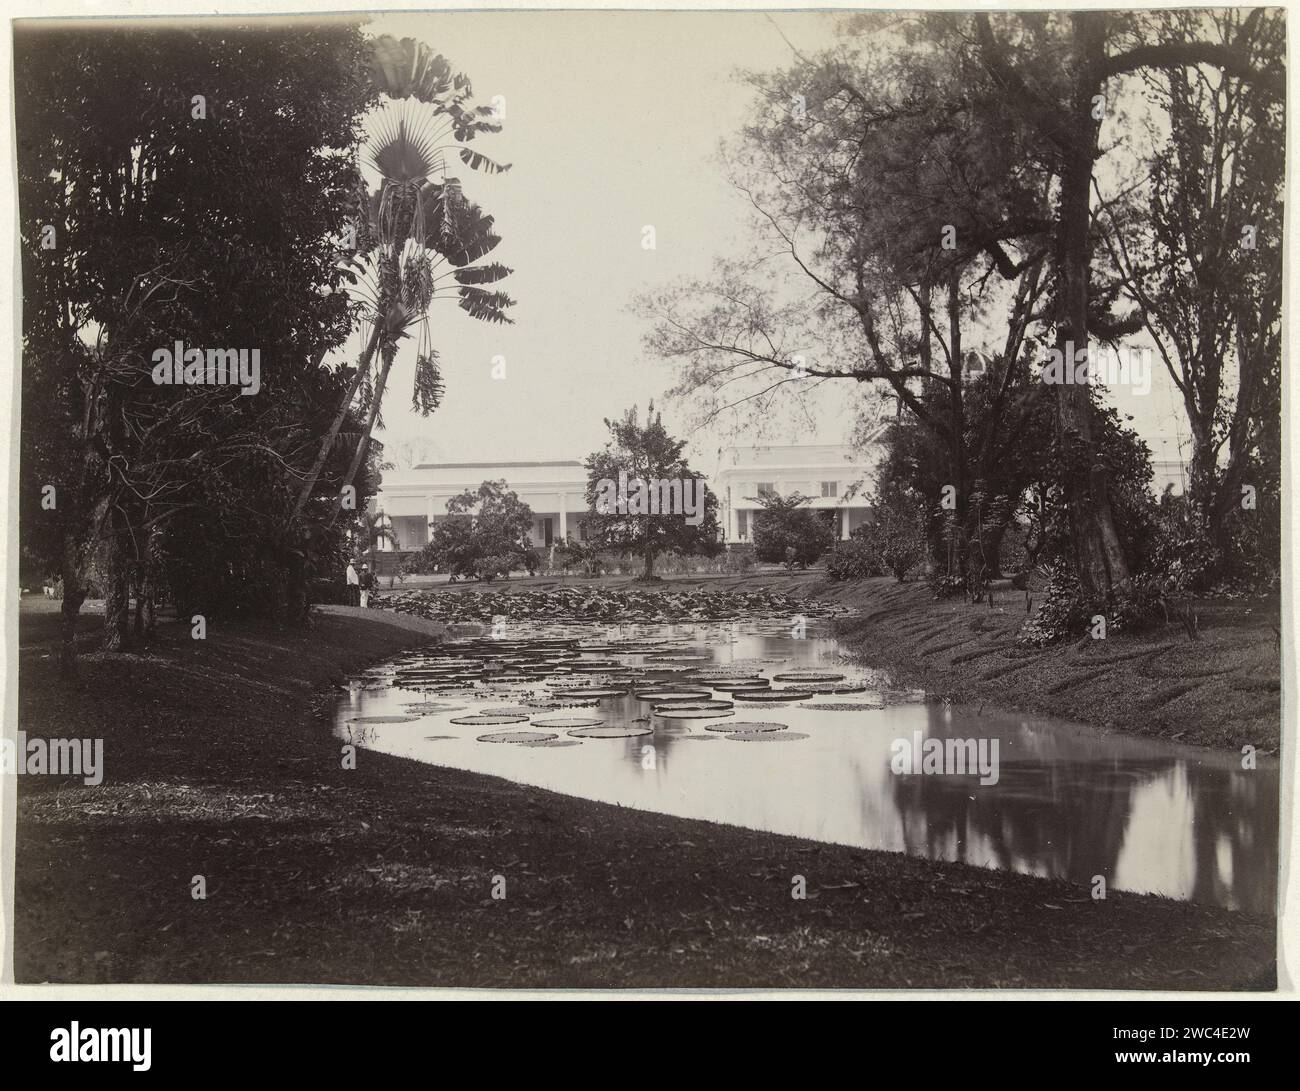 Gouverneurspaleis with pond in Buitenzorg, West -Java, Anonymous, 1870 - 1900 photograph  Indonesia paper albumen print palace. garden pond Palace of the Governor General Stock Photo